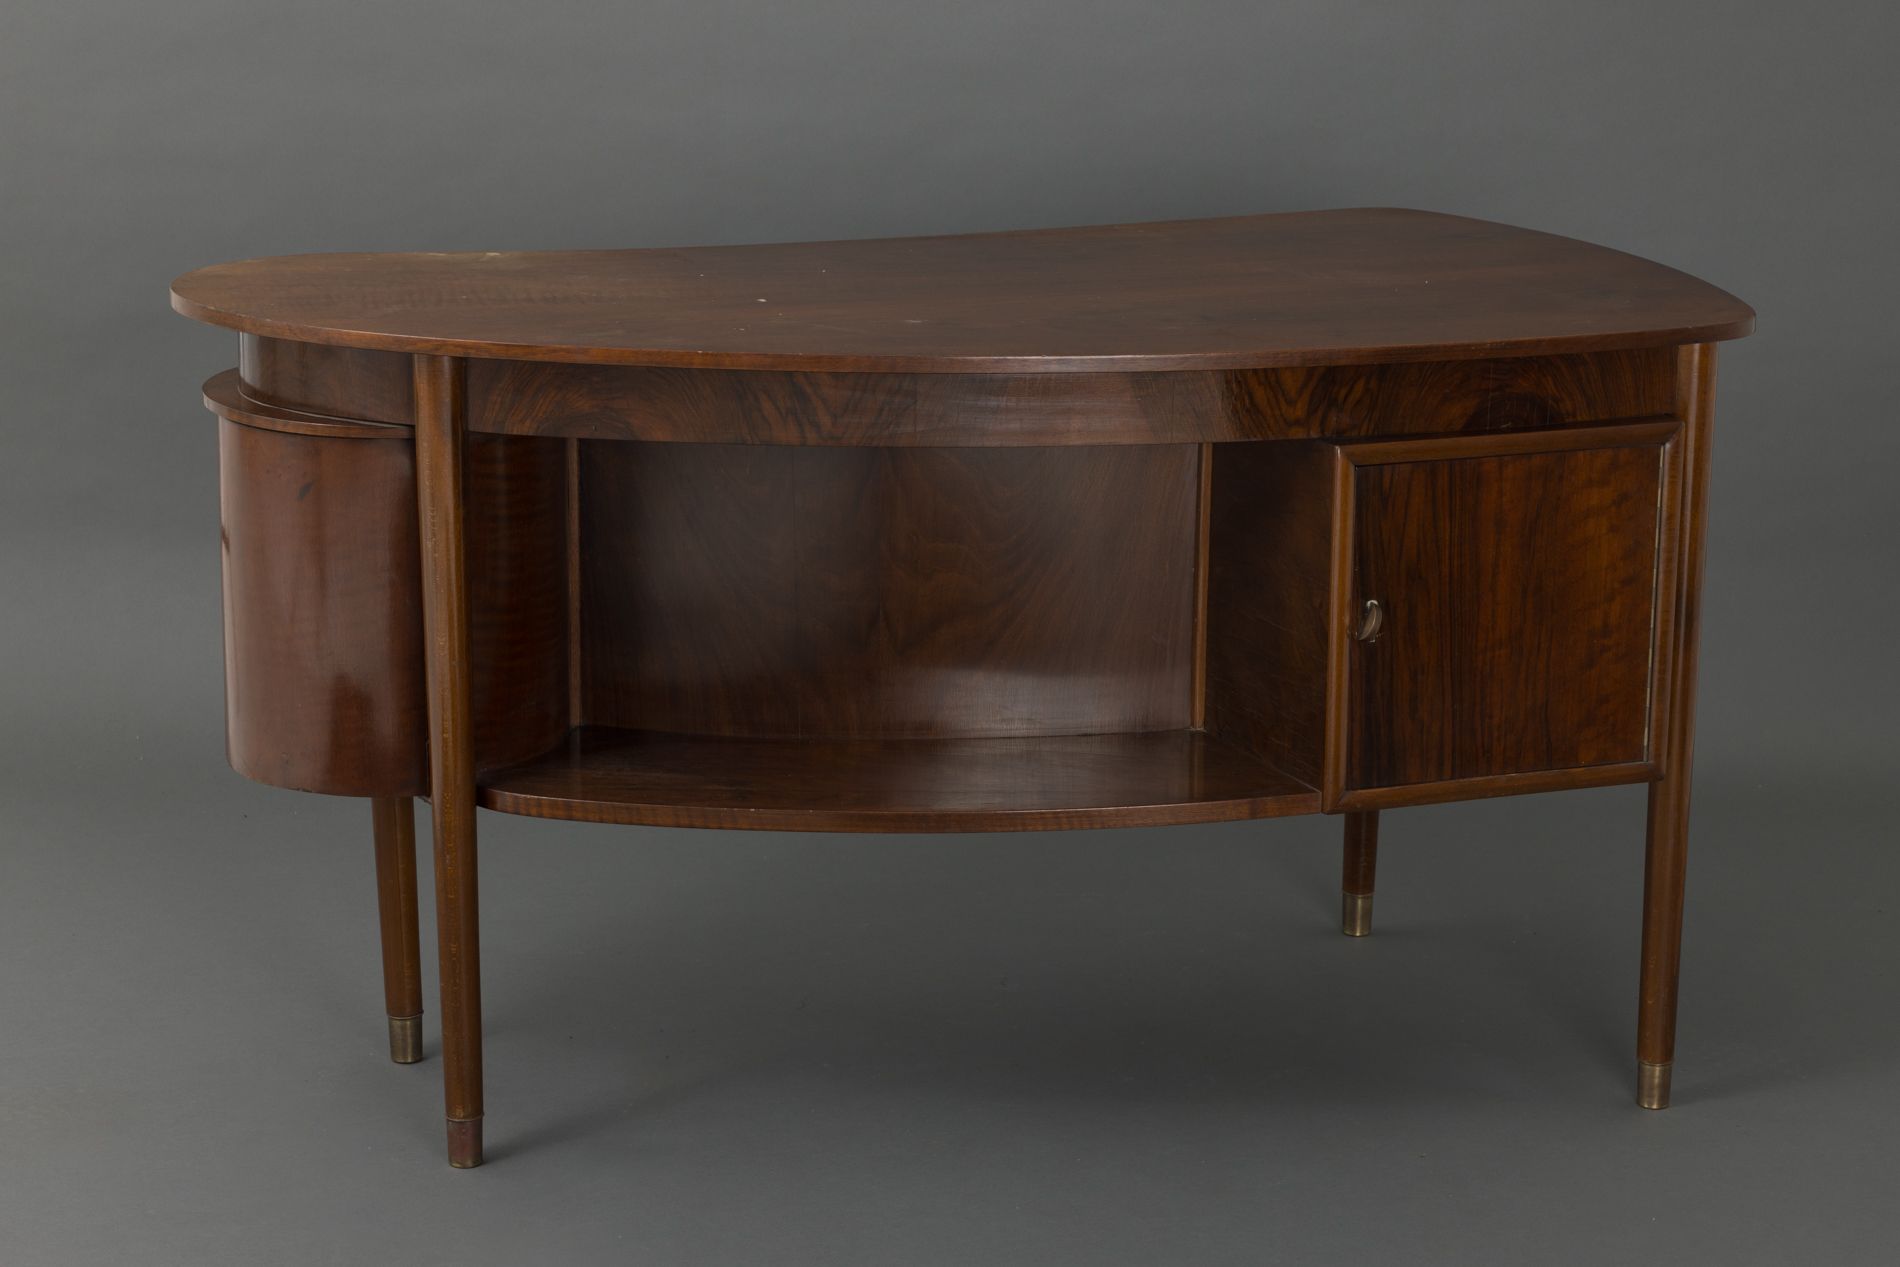 Null Bean desk in mahogany and mahogany veneer opening with a rounded pedestal a&hellip;